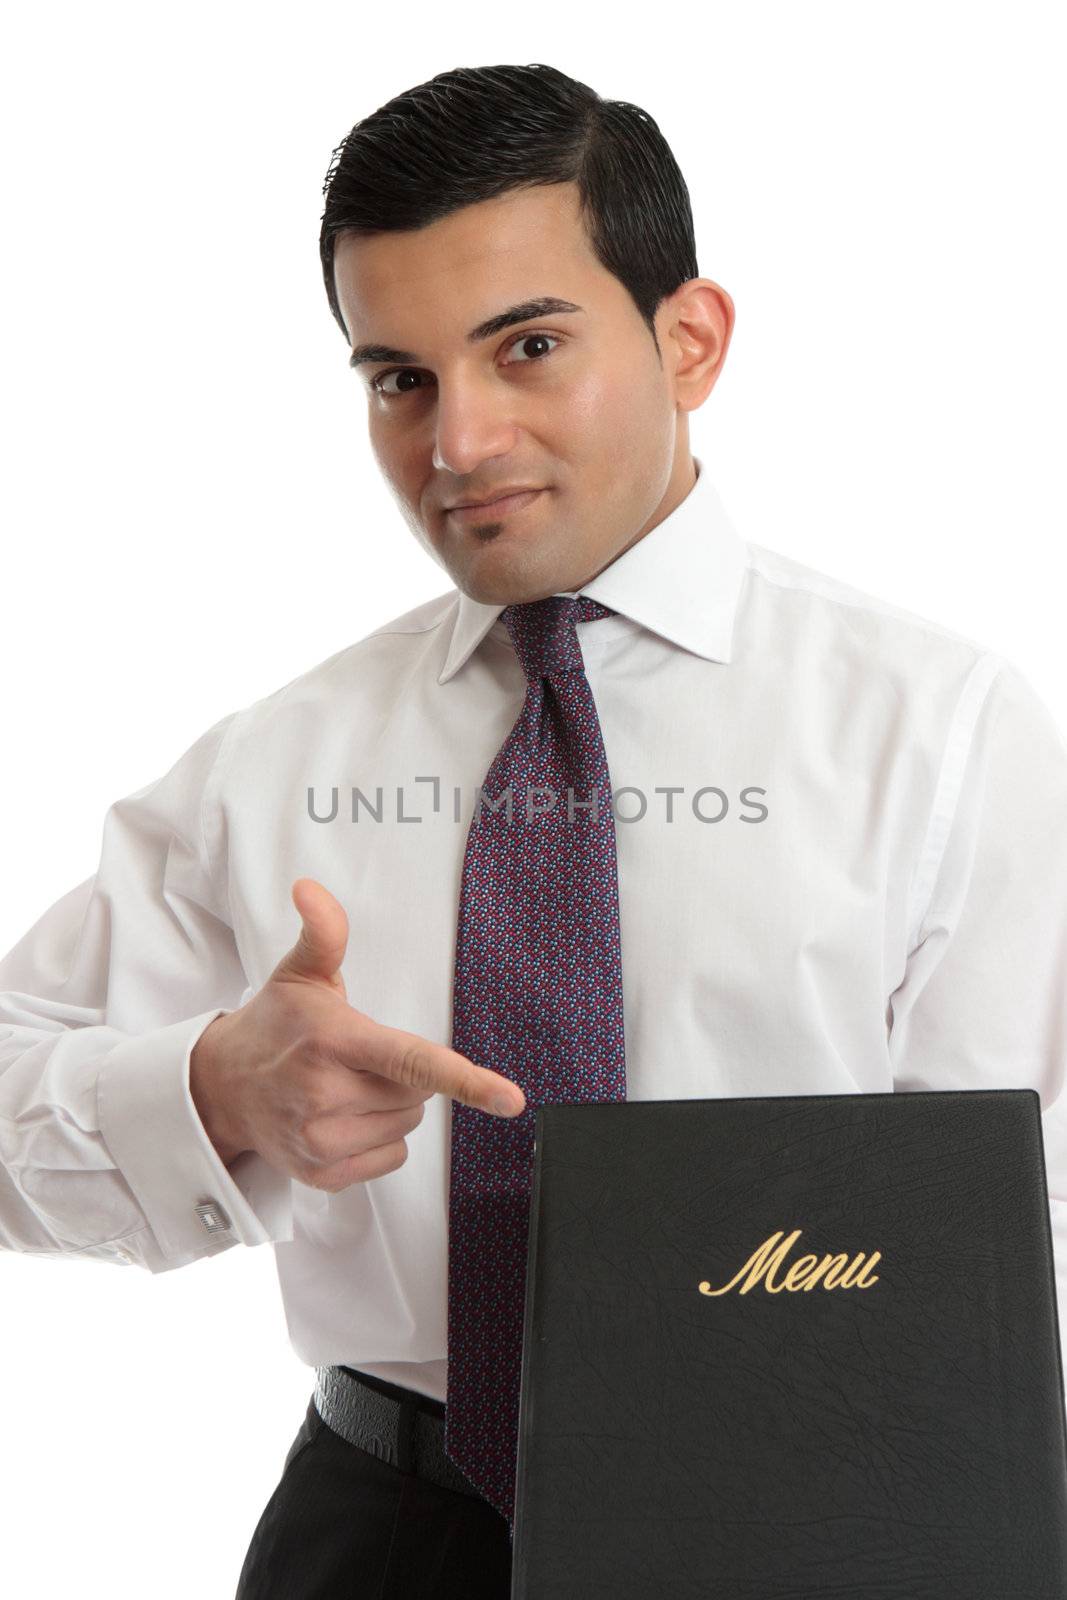 A businessman or waiter holding a leather bound menu or other document.